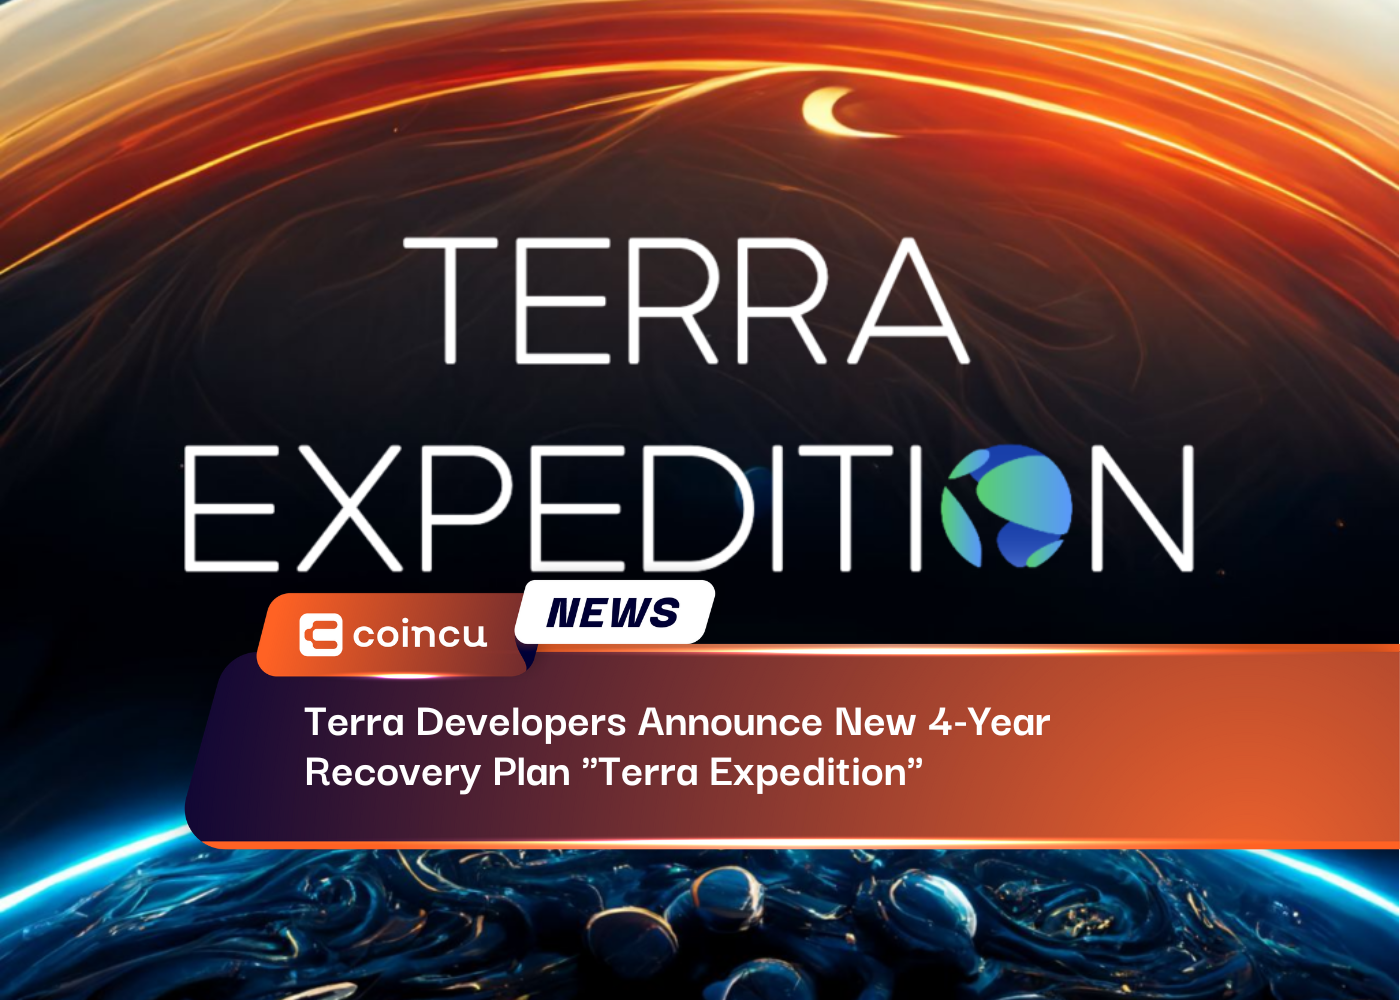 Terra Developers Announce New 4-Year Recovery Plan "Terra Expedition"